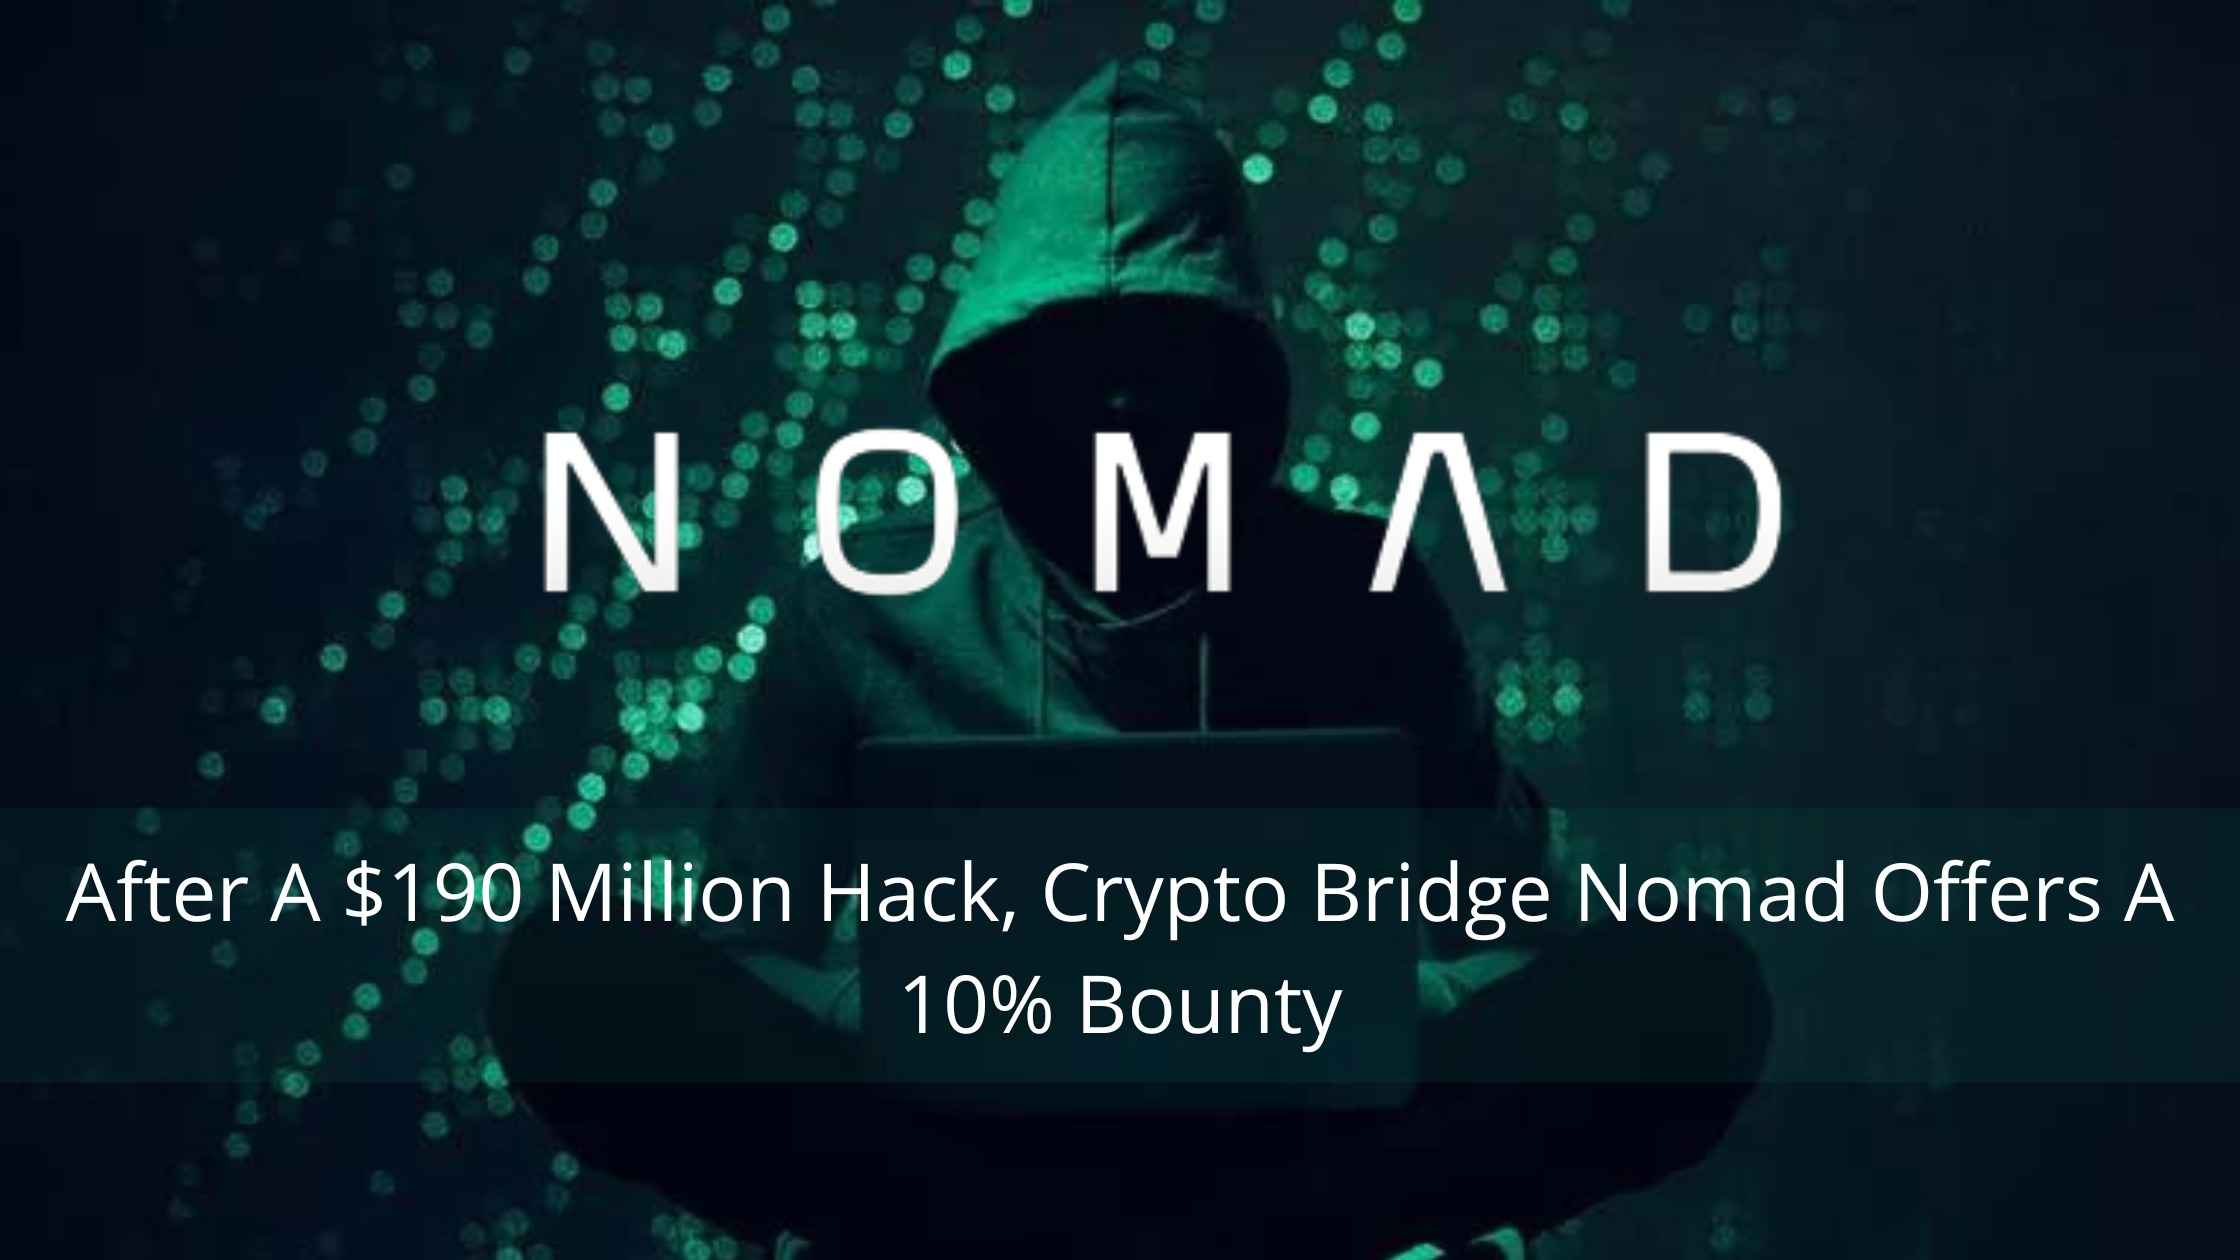 After A $190 Million Hack, Crypto Bridge Nomad Offers A 10% Bounty!